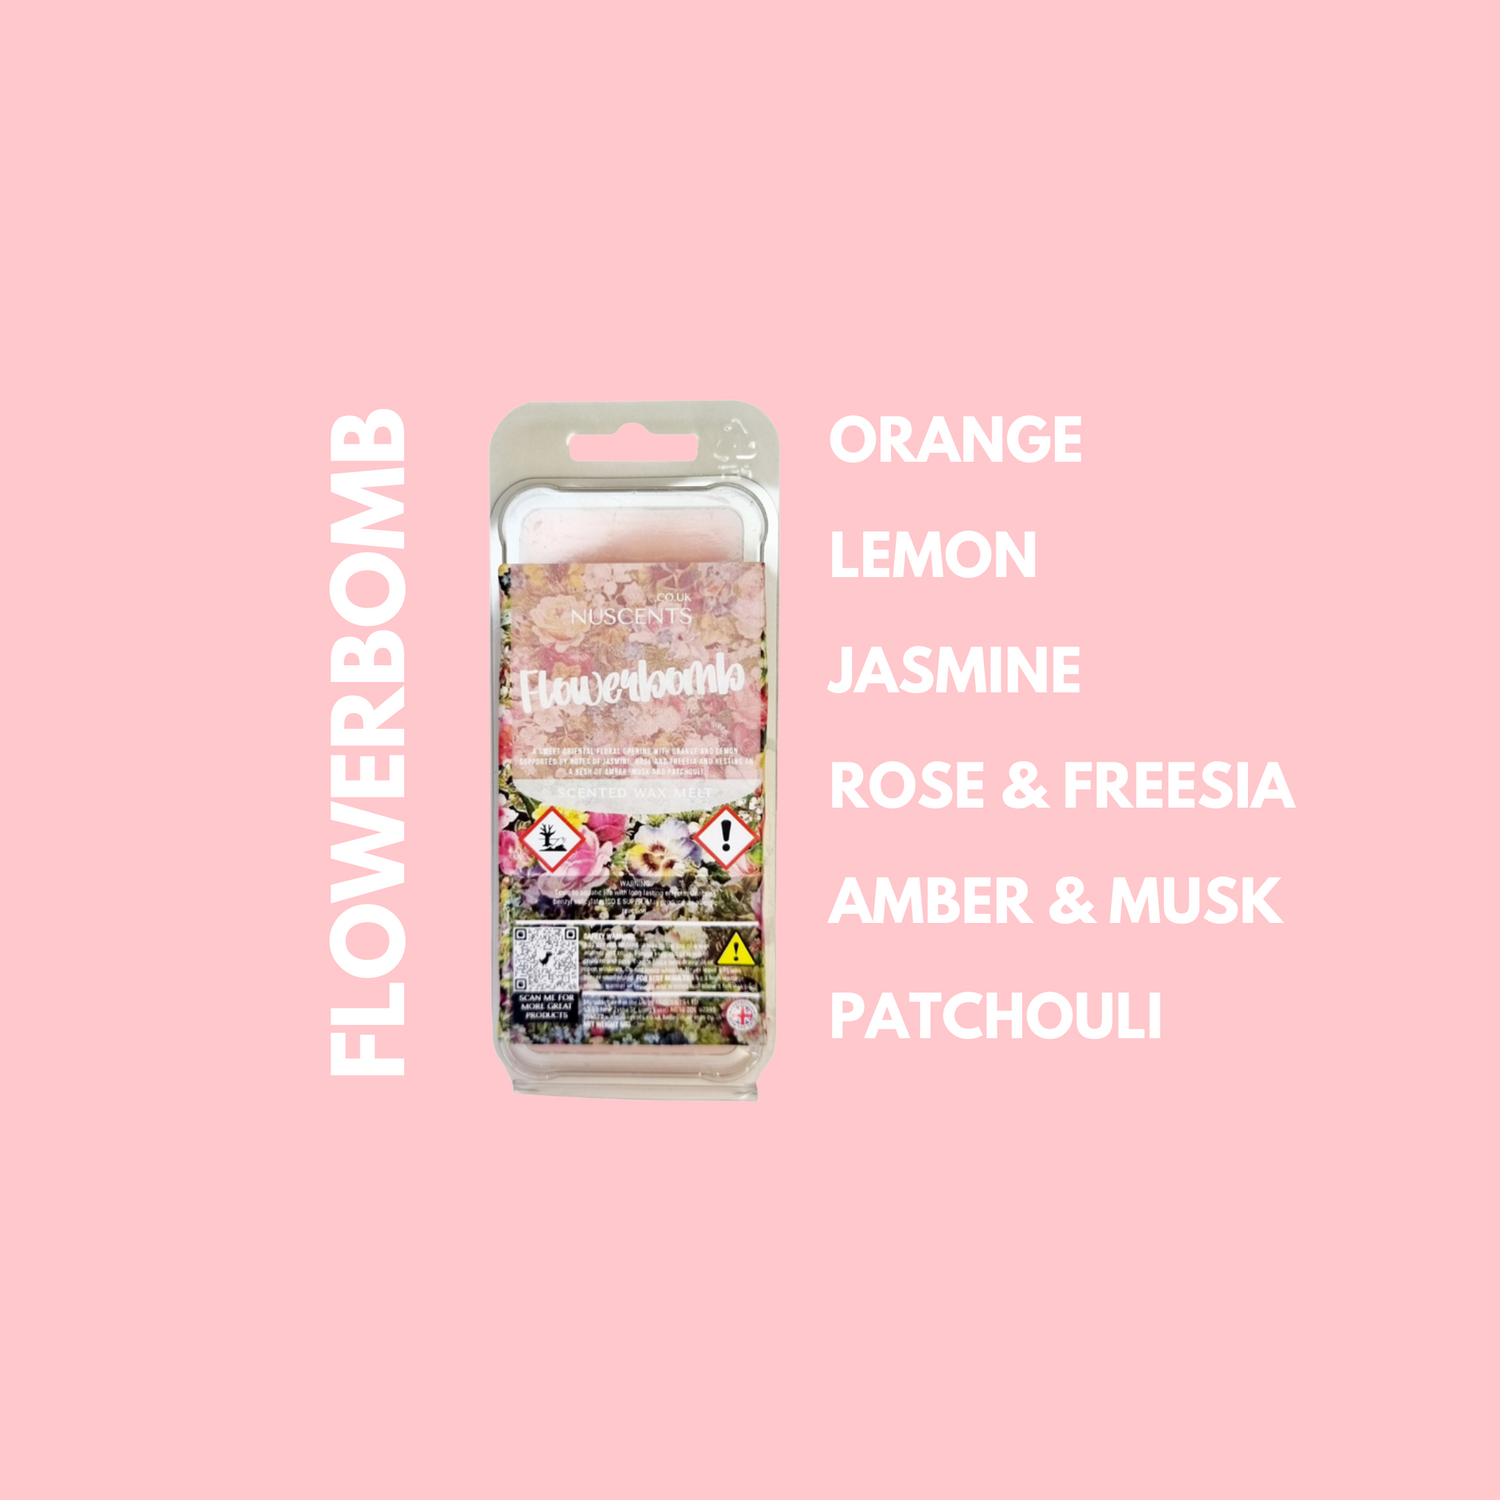 Flowerbomb Wax Melt Scent Notes